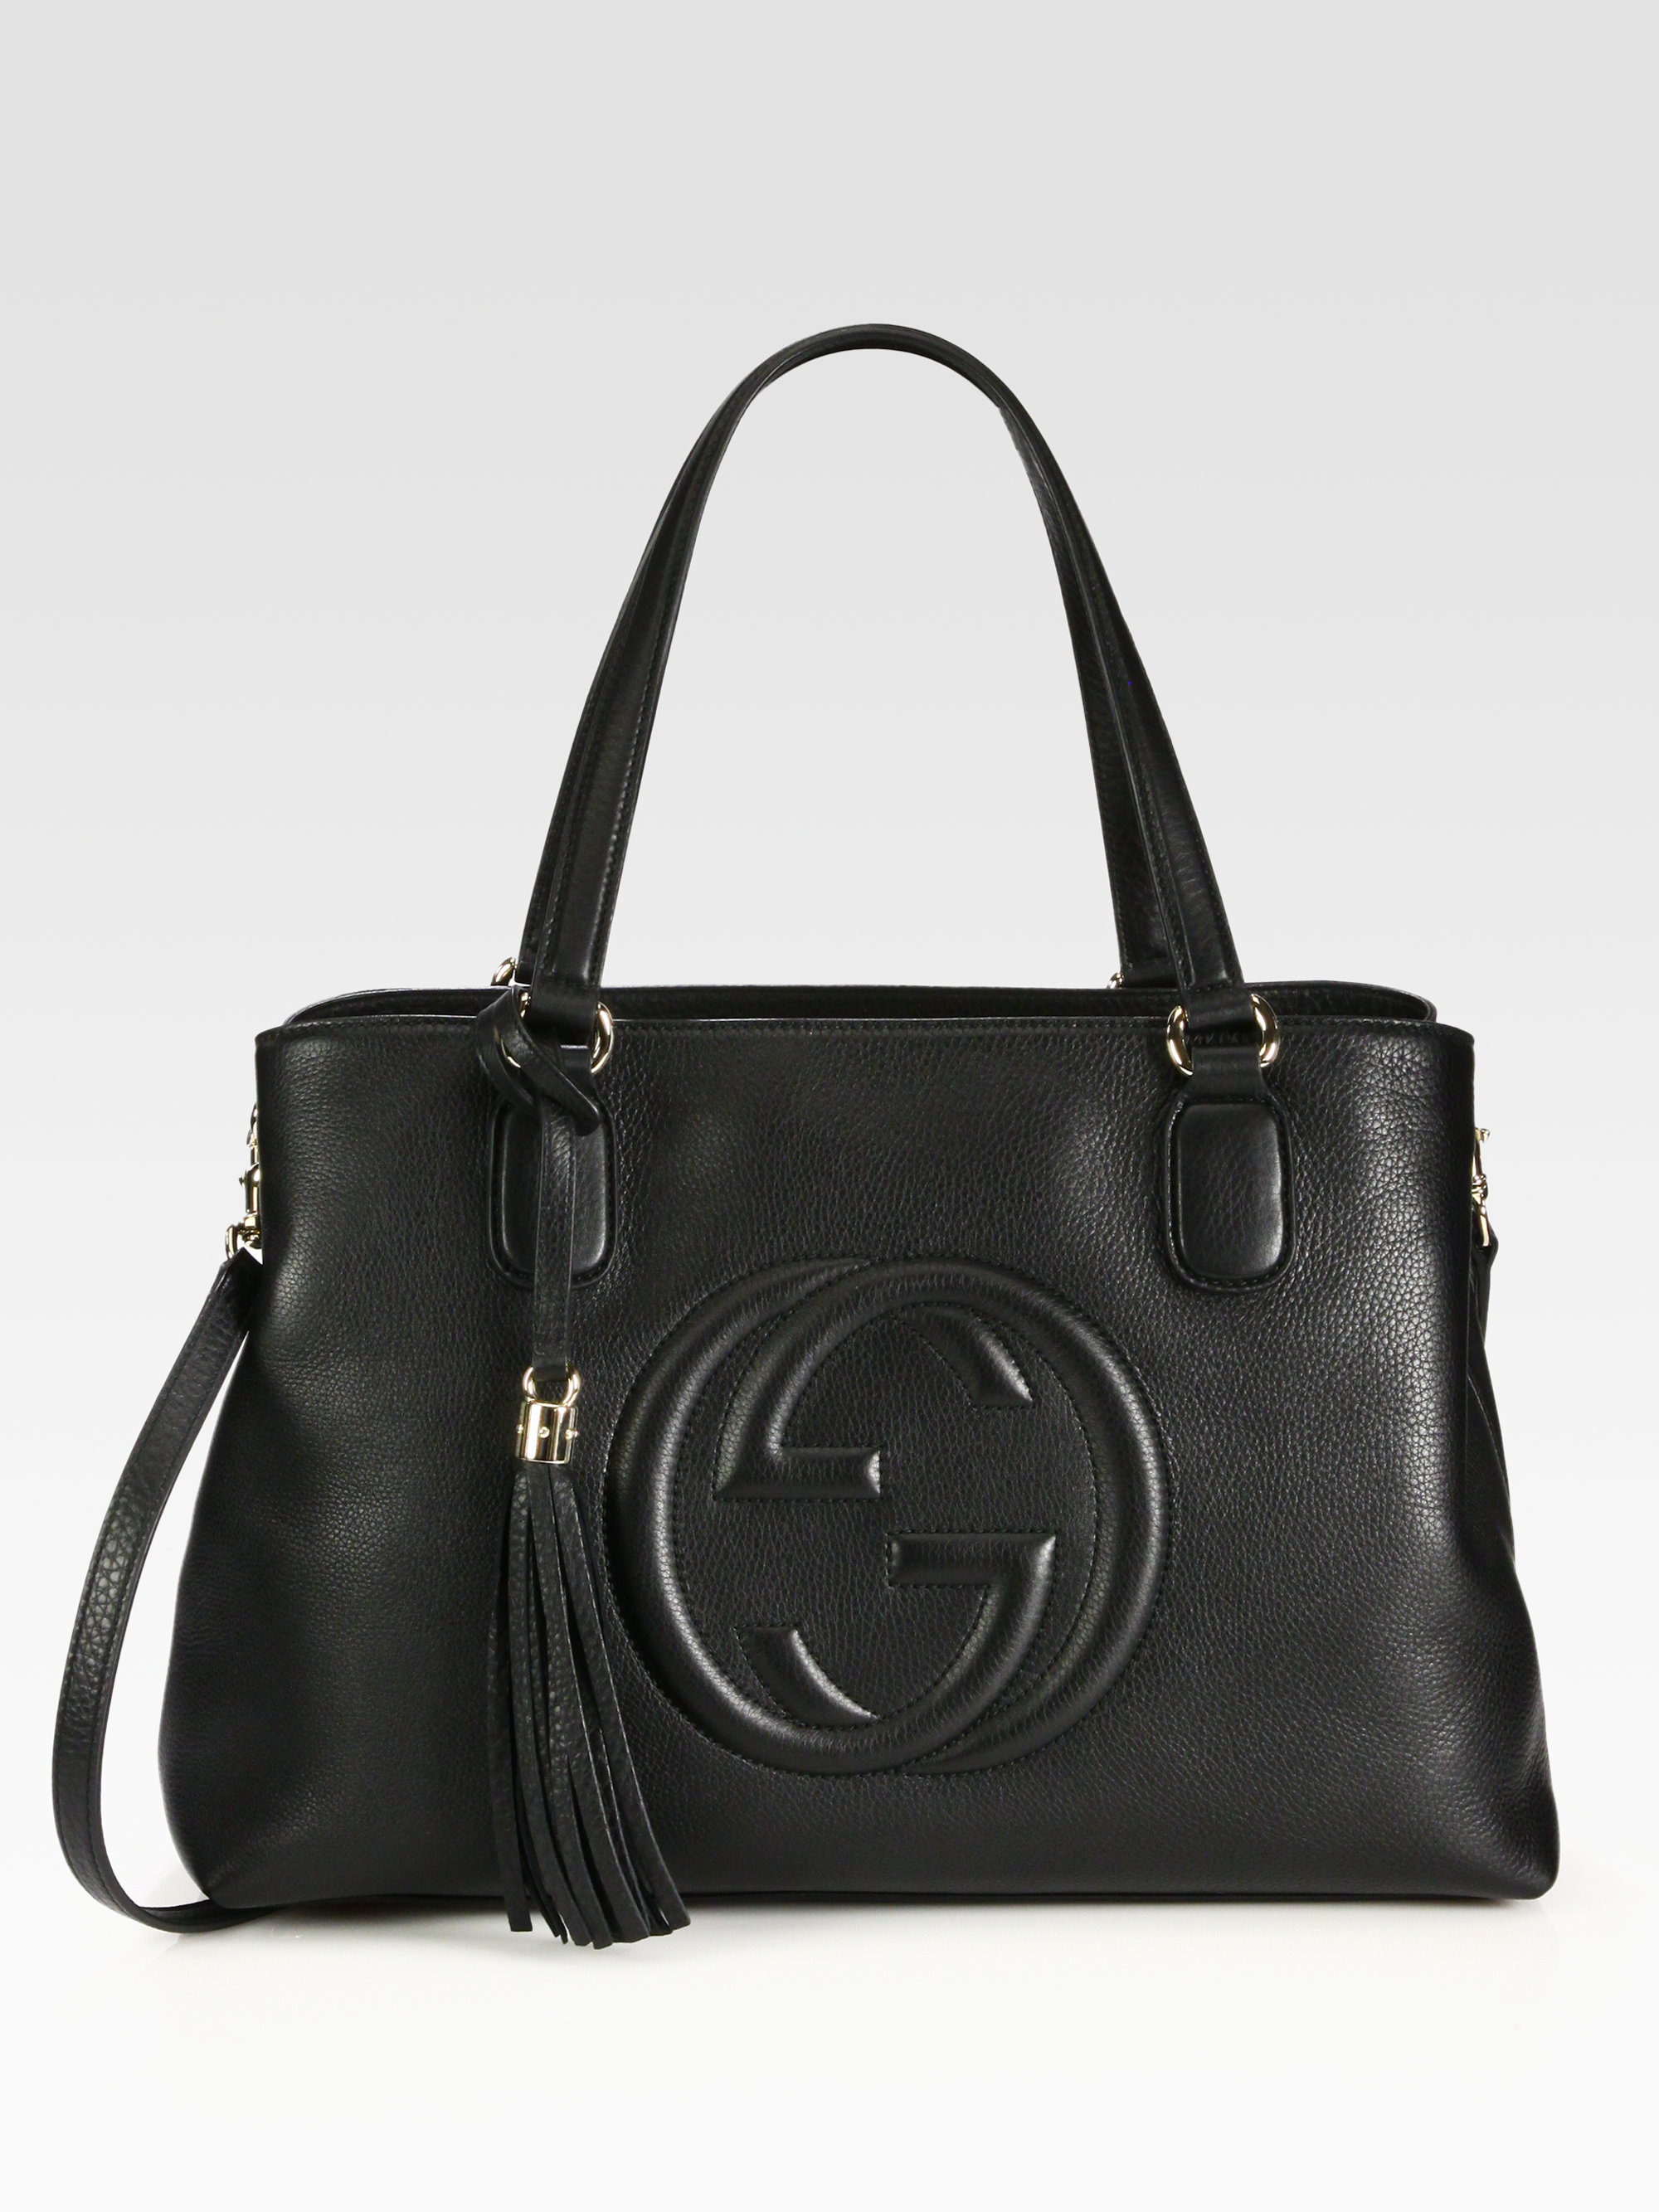 Lyst - Gucci Soho Leather Working Tote in Black